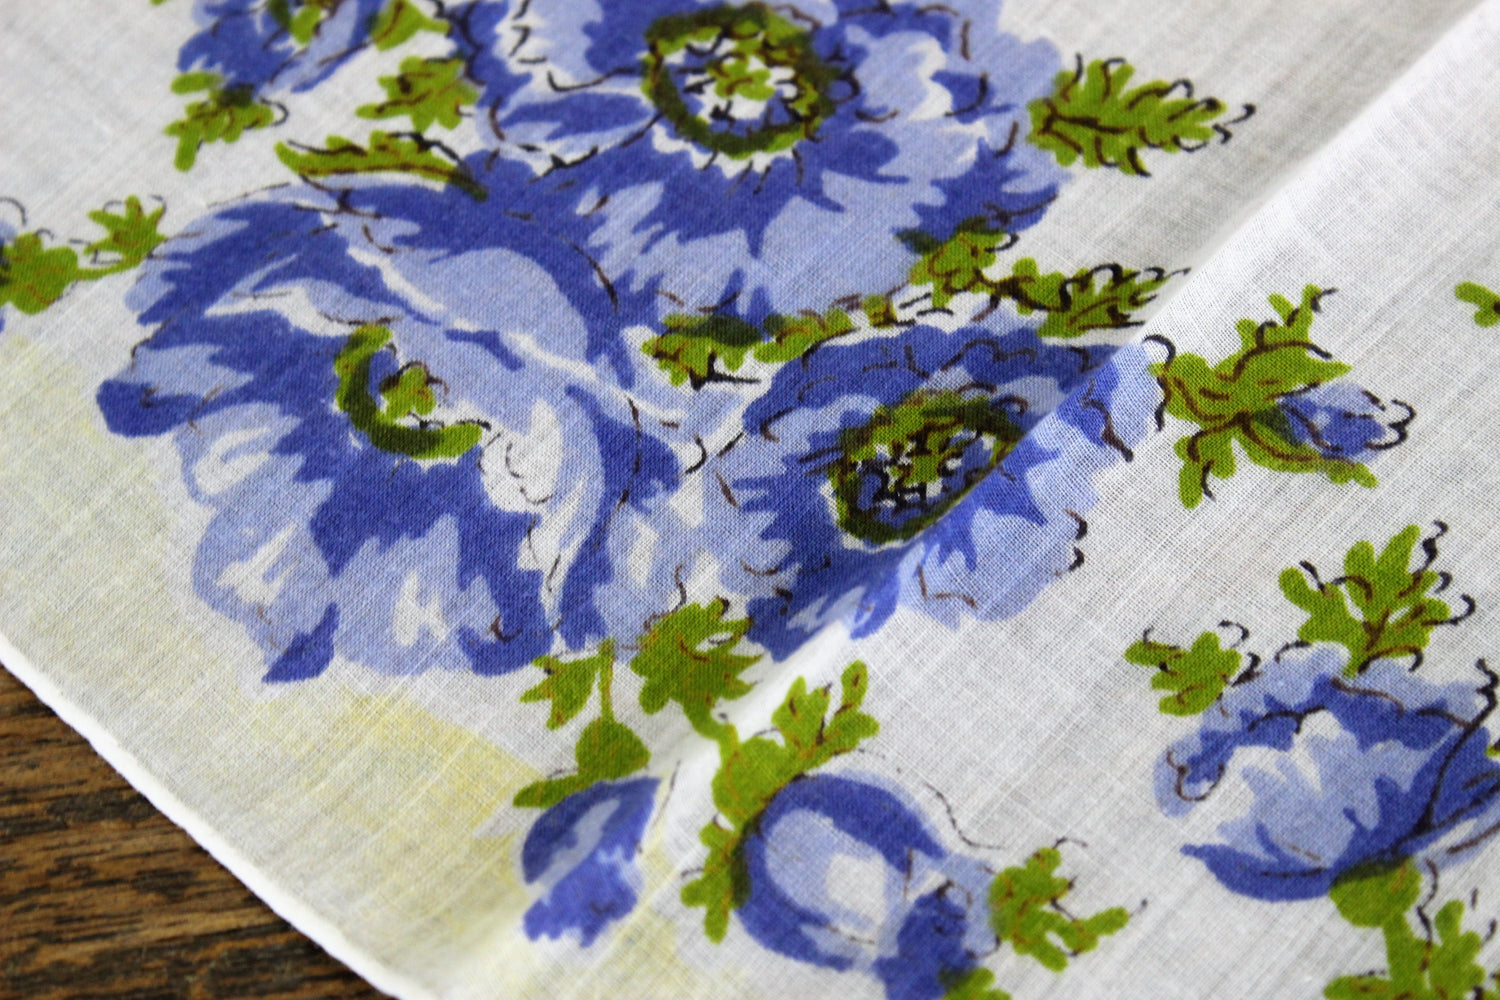 Vintage Cotton Handkerchief Floral Print in Pink and Blue